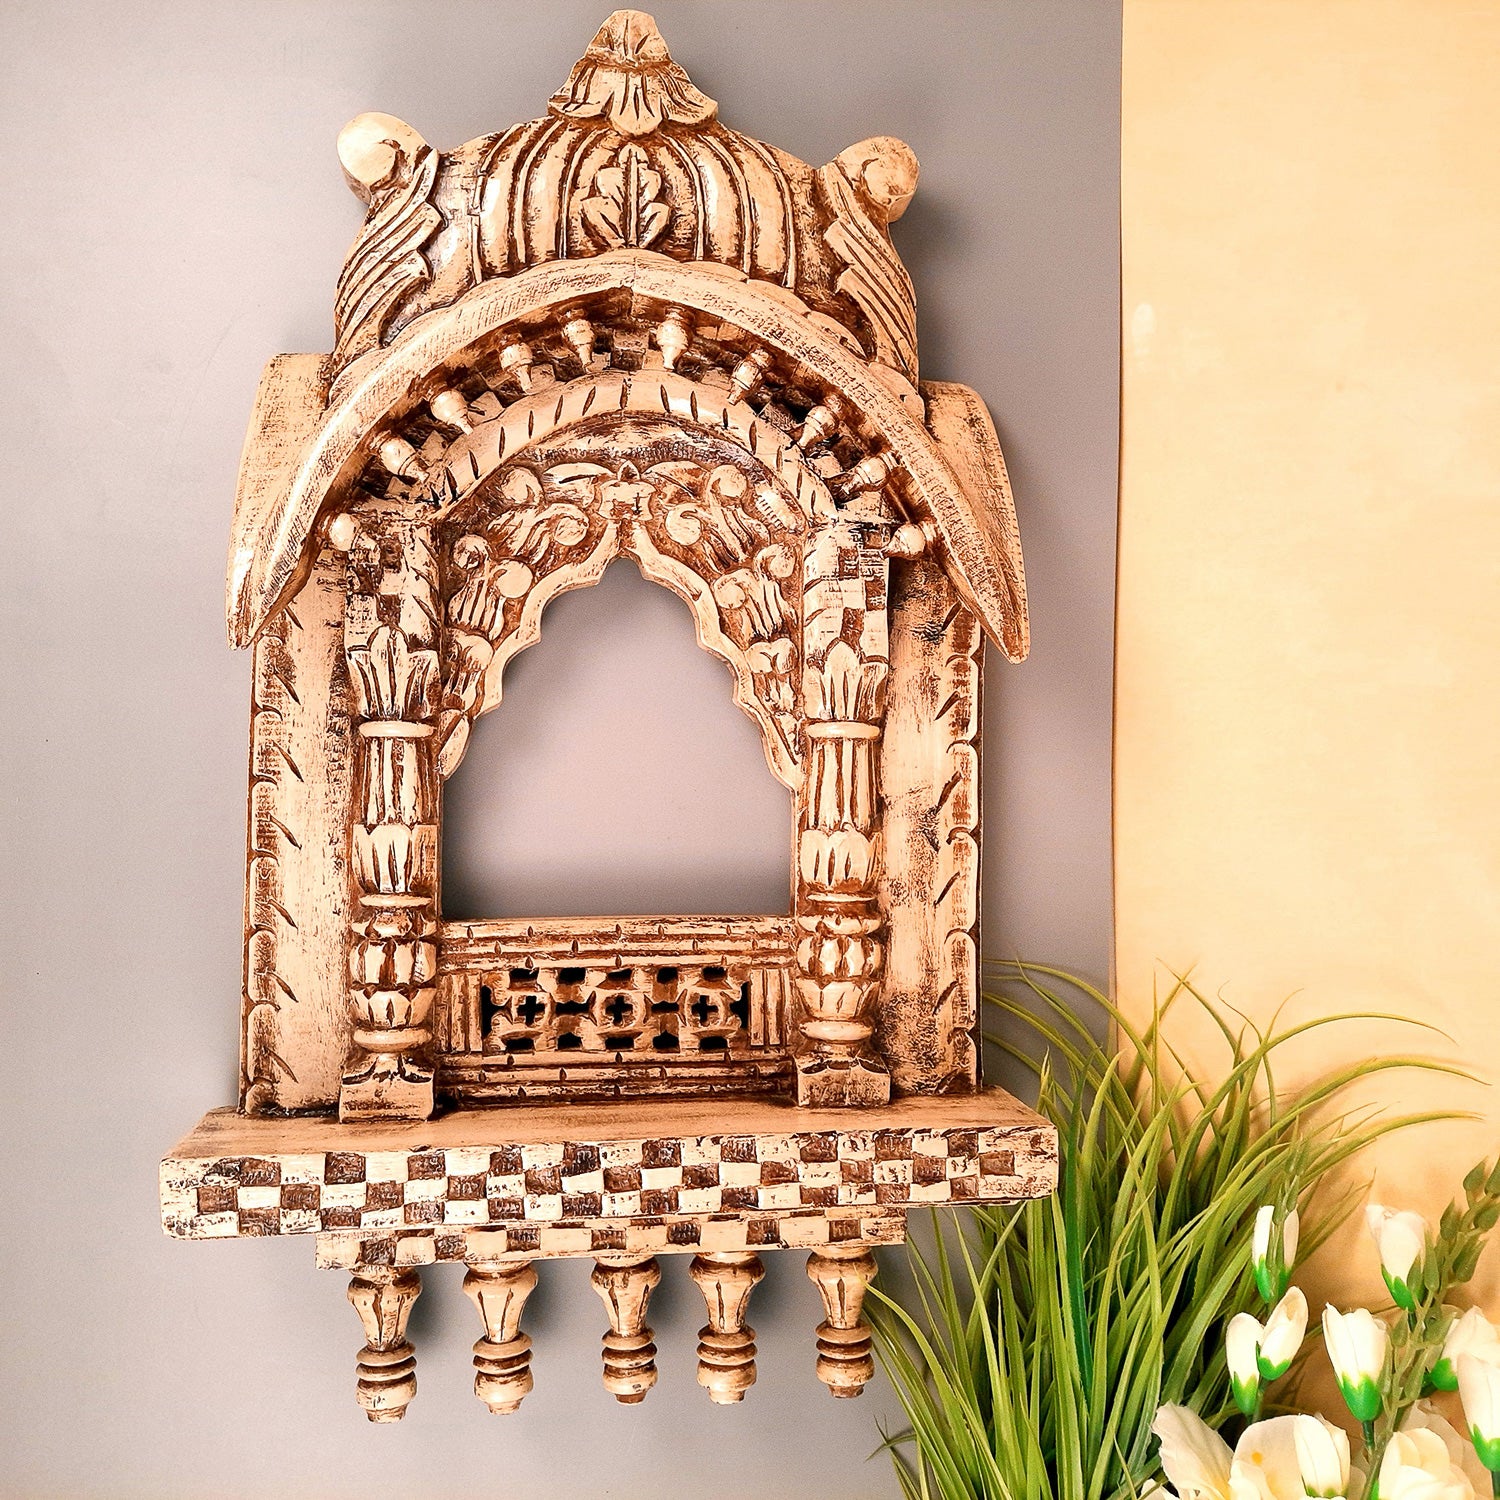 Jharokha Wall Hanging - Window Design | Wooden Jharokha Hangings for Photo Frame & Mirrors - For Home, Wall Decor, Living room, Entrance Decoration & Gifts - 27 Inch